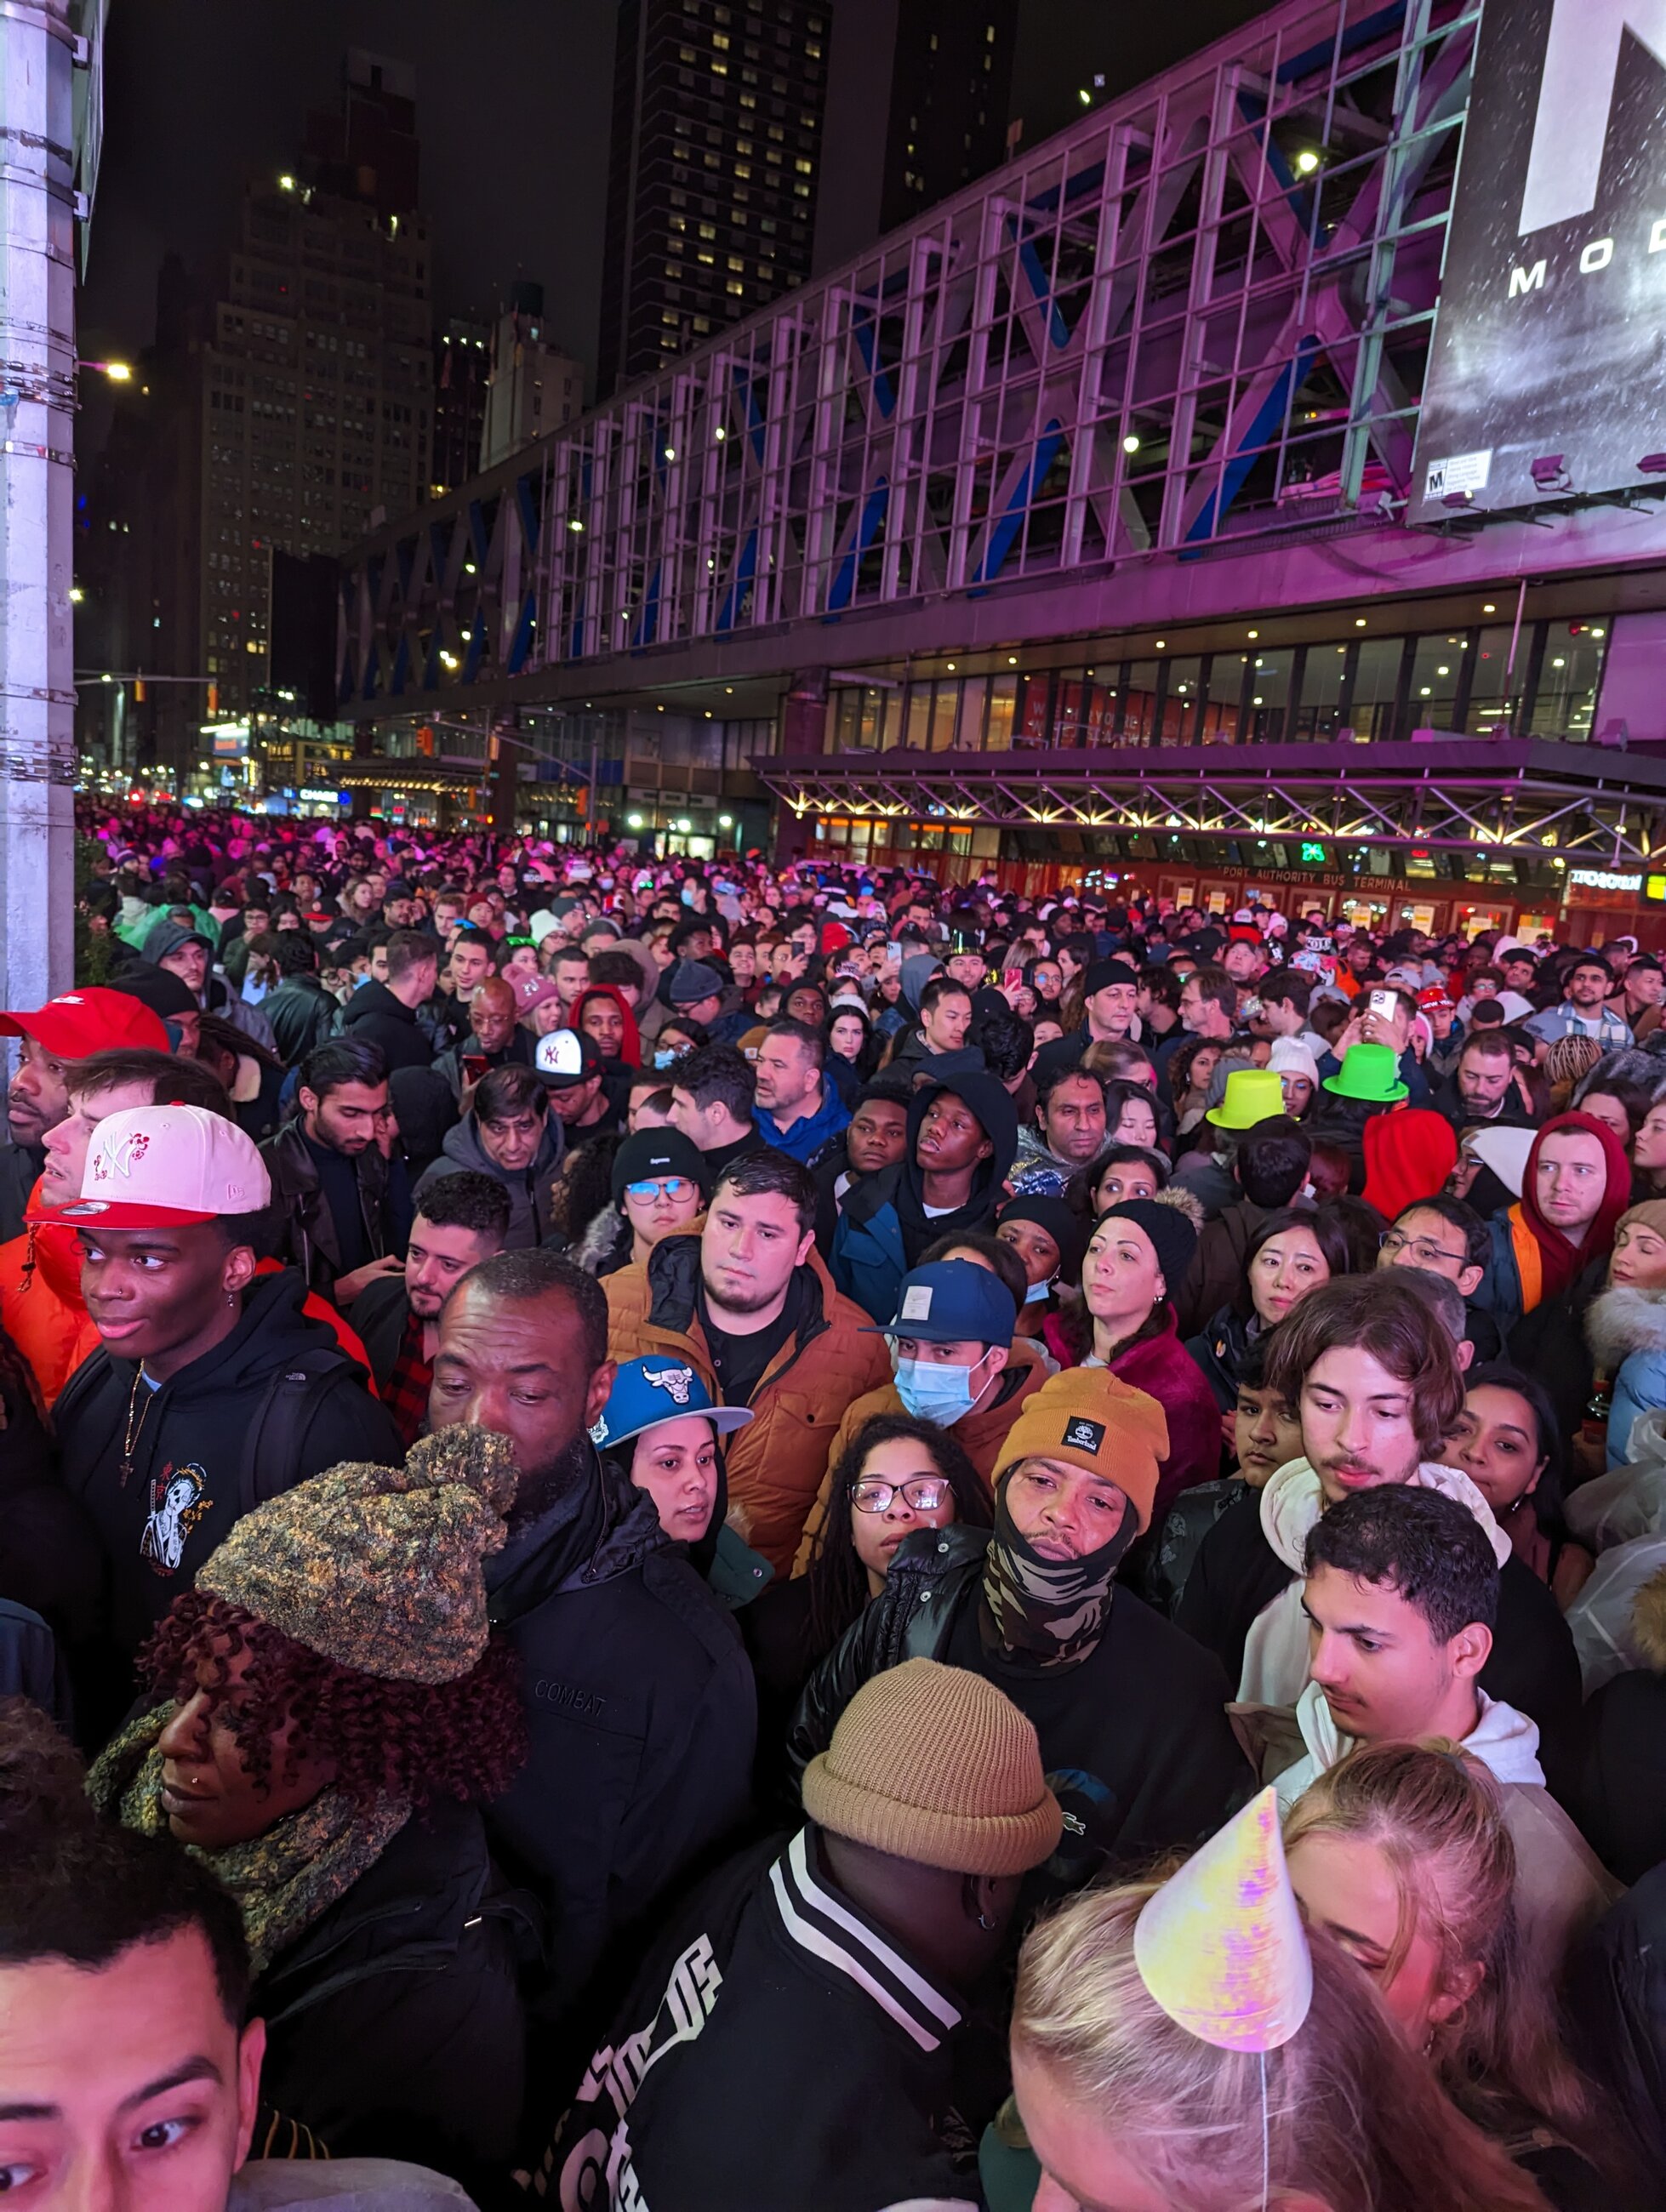 Crazy new years eve experience in times square 